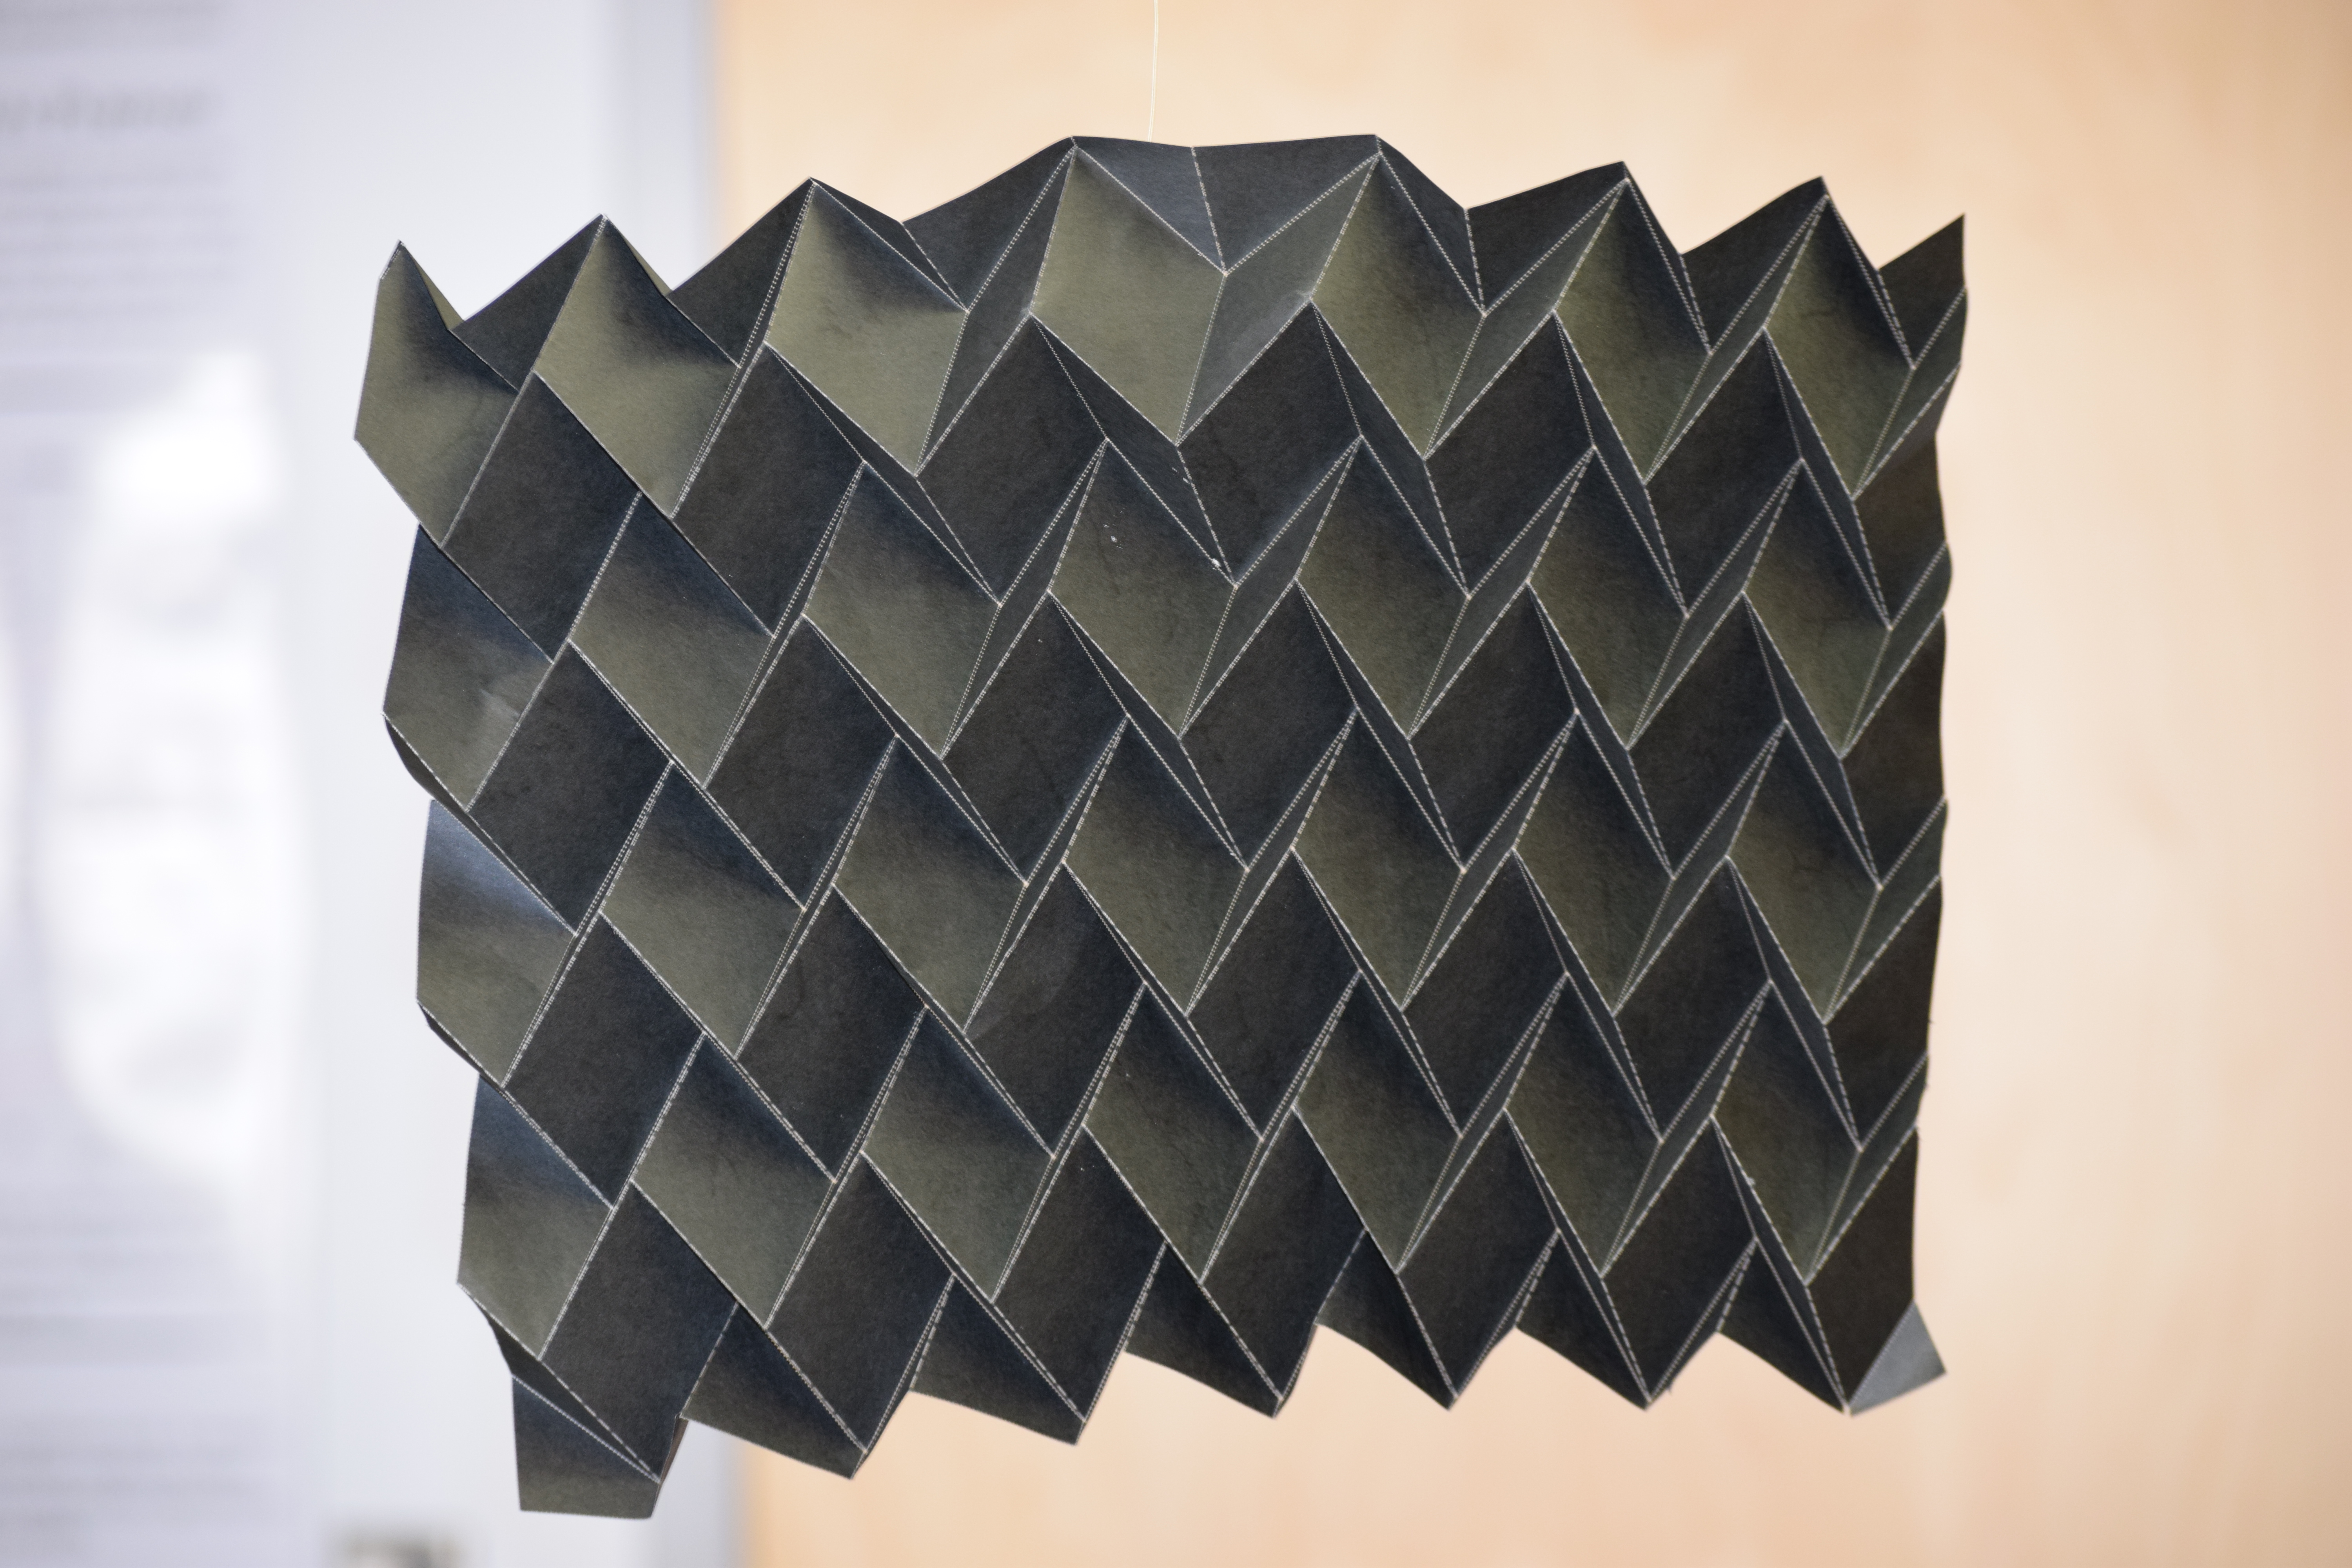 A three-dimensional, foldable radiator, inspired by the art of paper folding. 